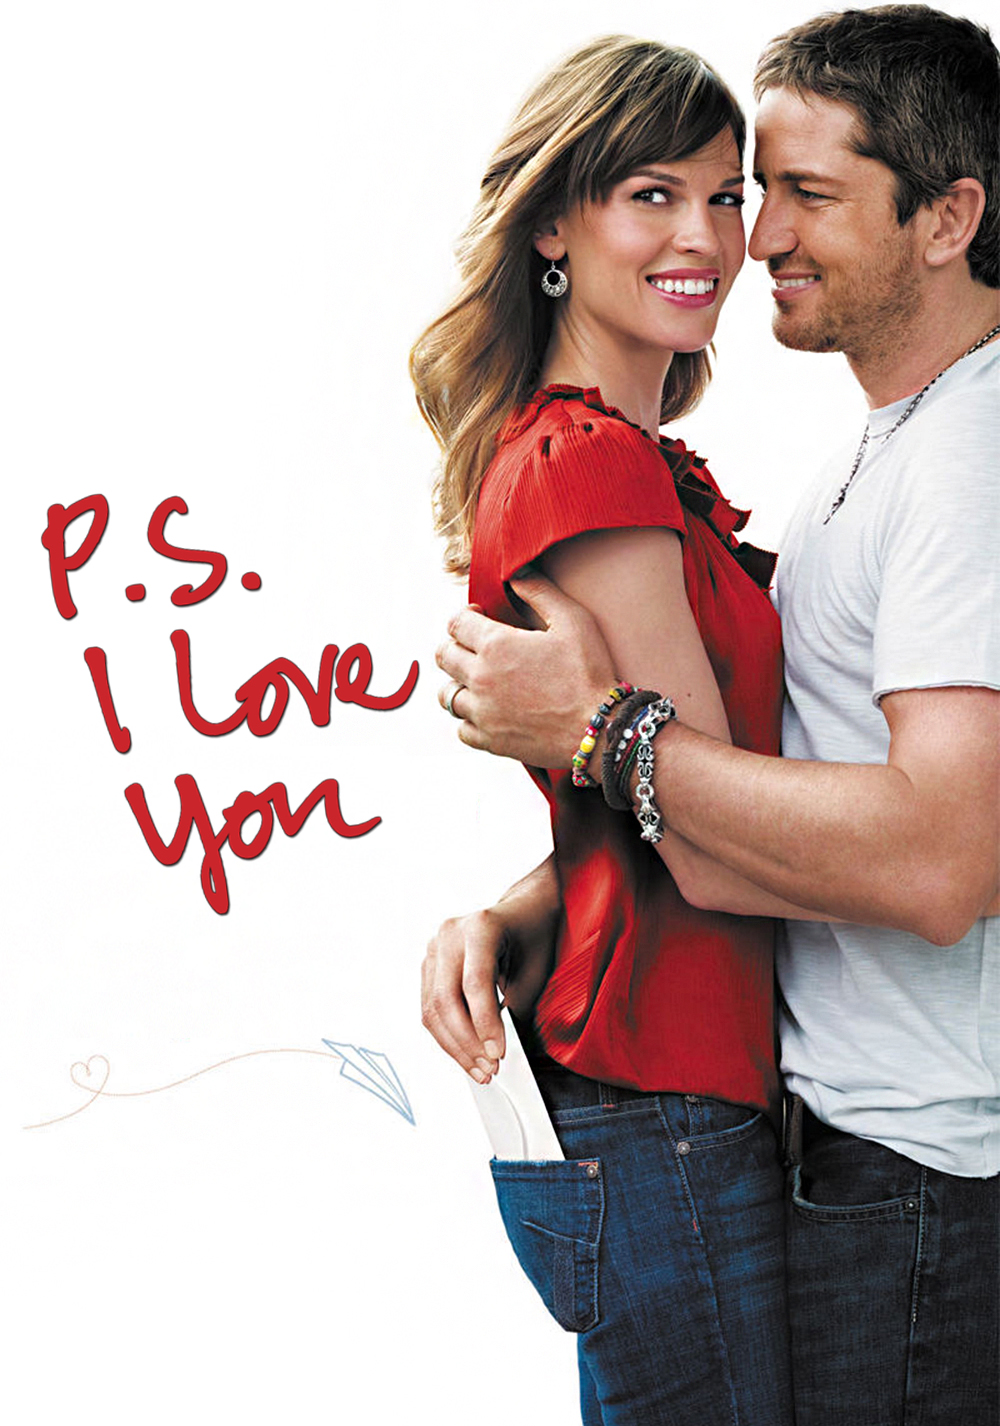 movie review ps i love you